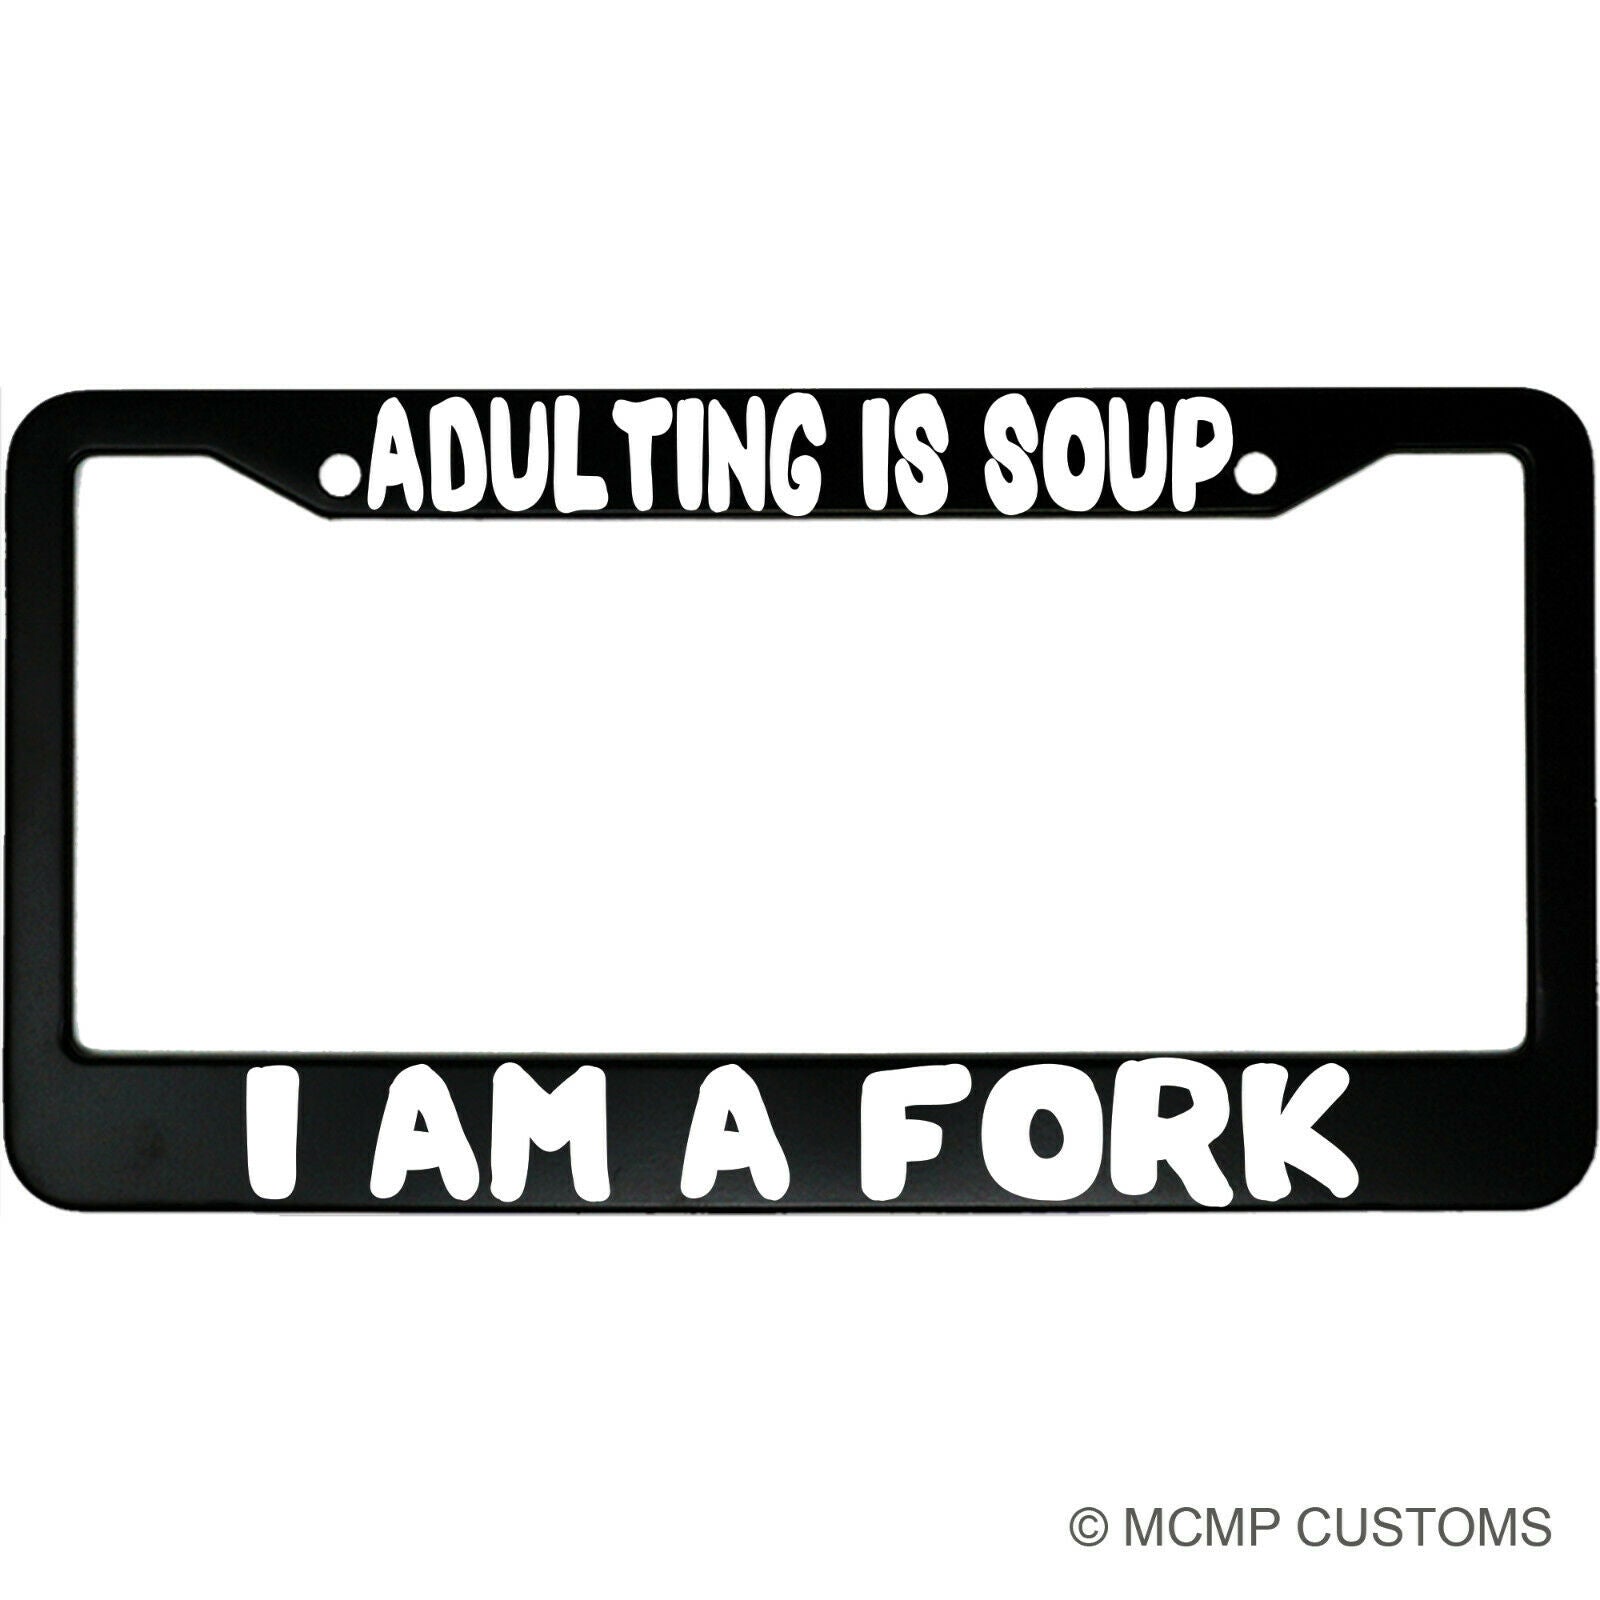 Adulting Is Soup, I Am A Fork